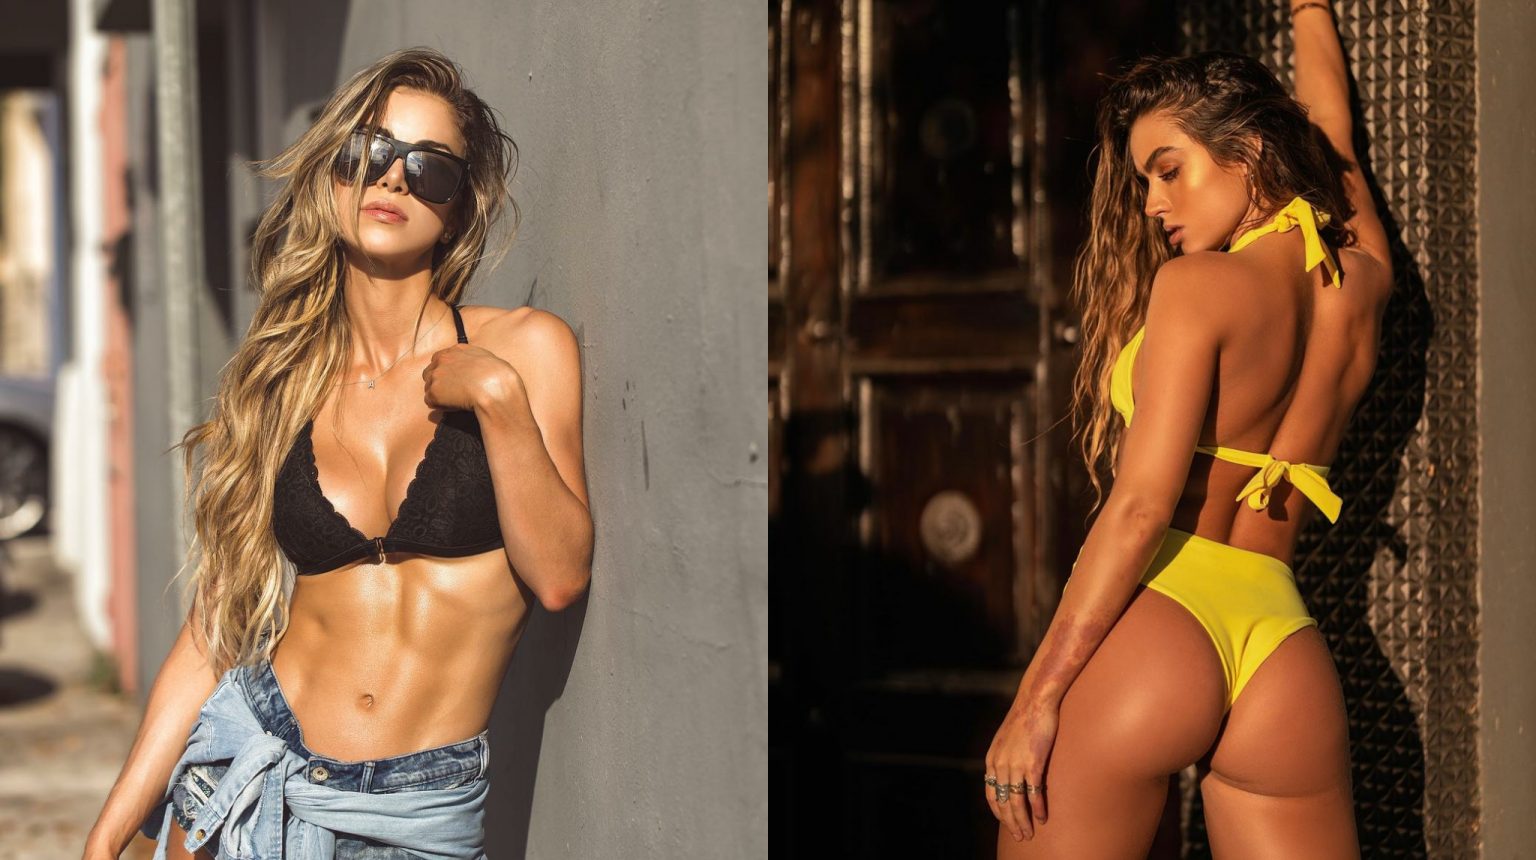 Top 10 hottest female fitness models of 2020